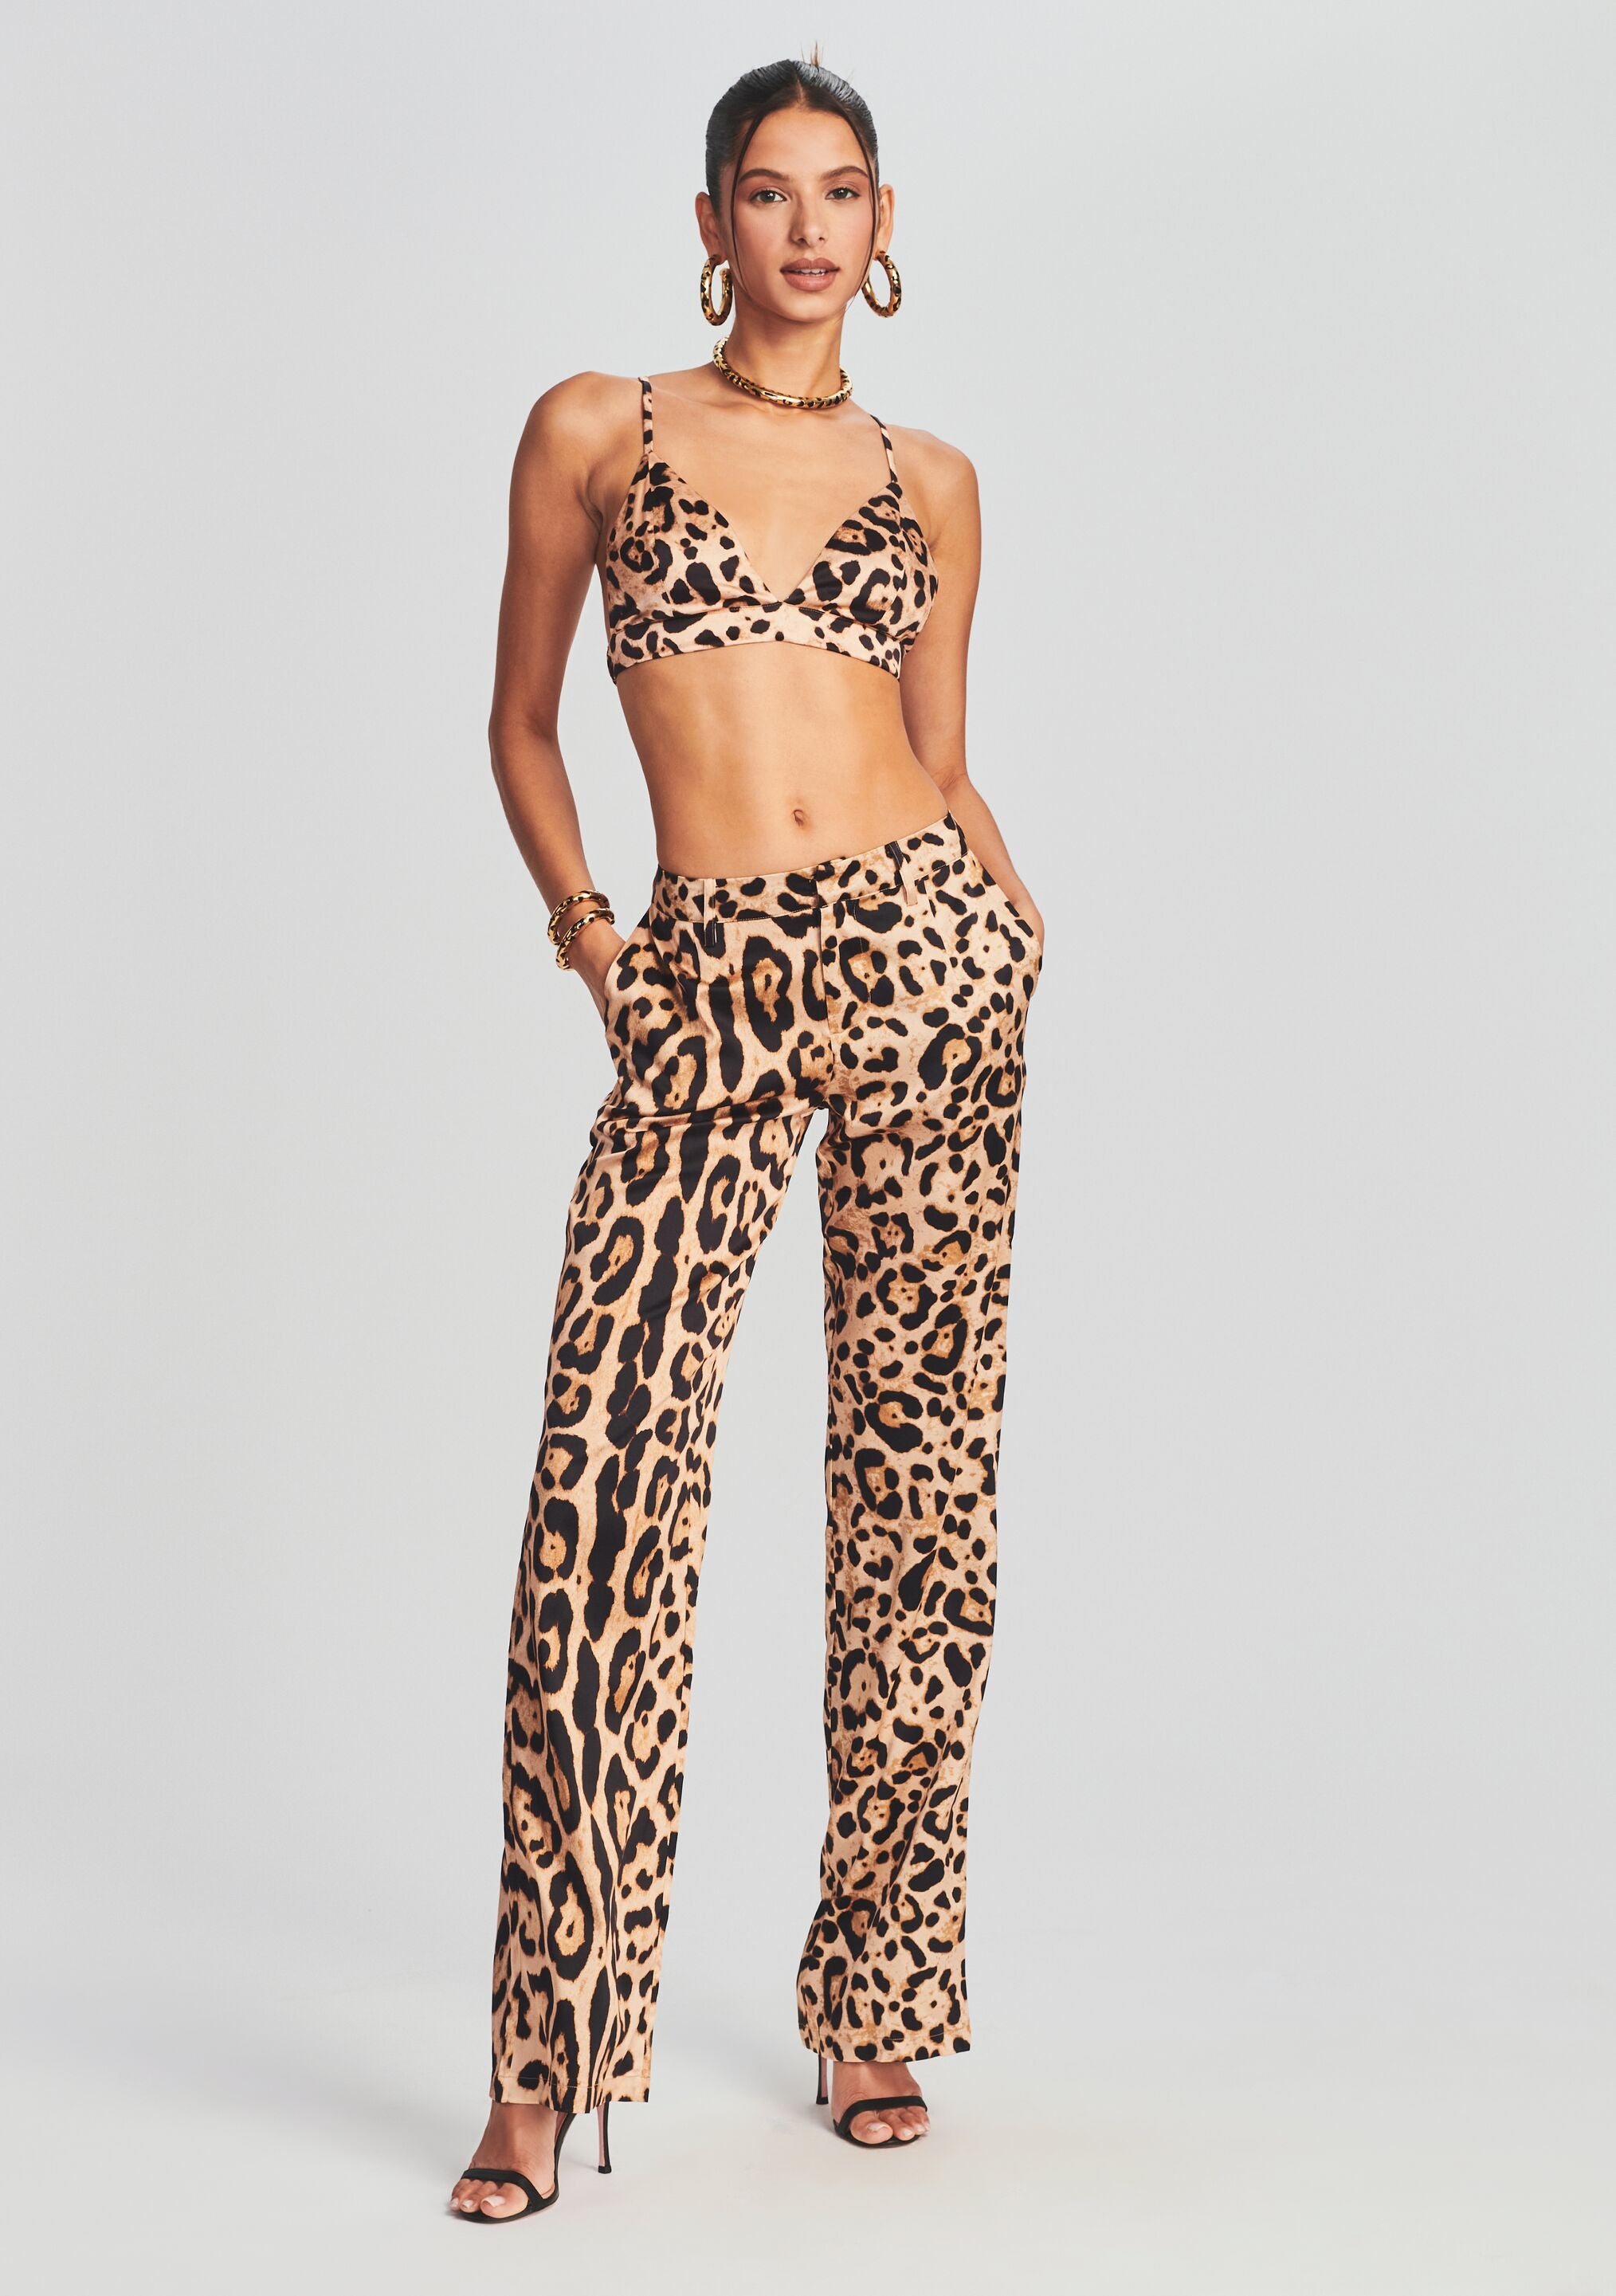 LEOPARD CHAOS PANT – Posers Hollywood